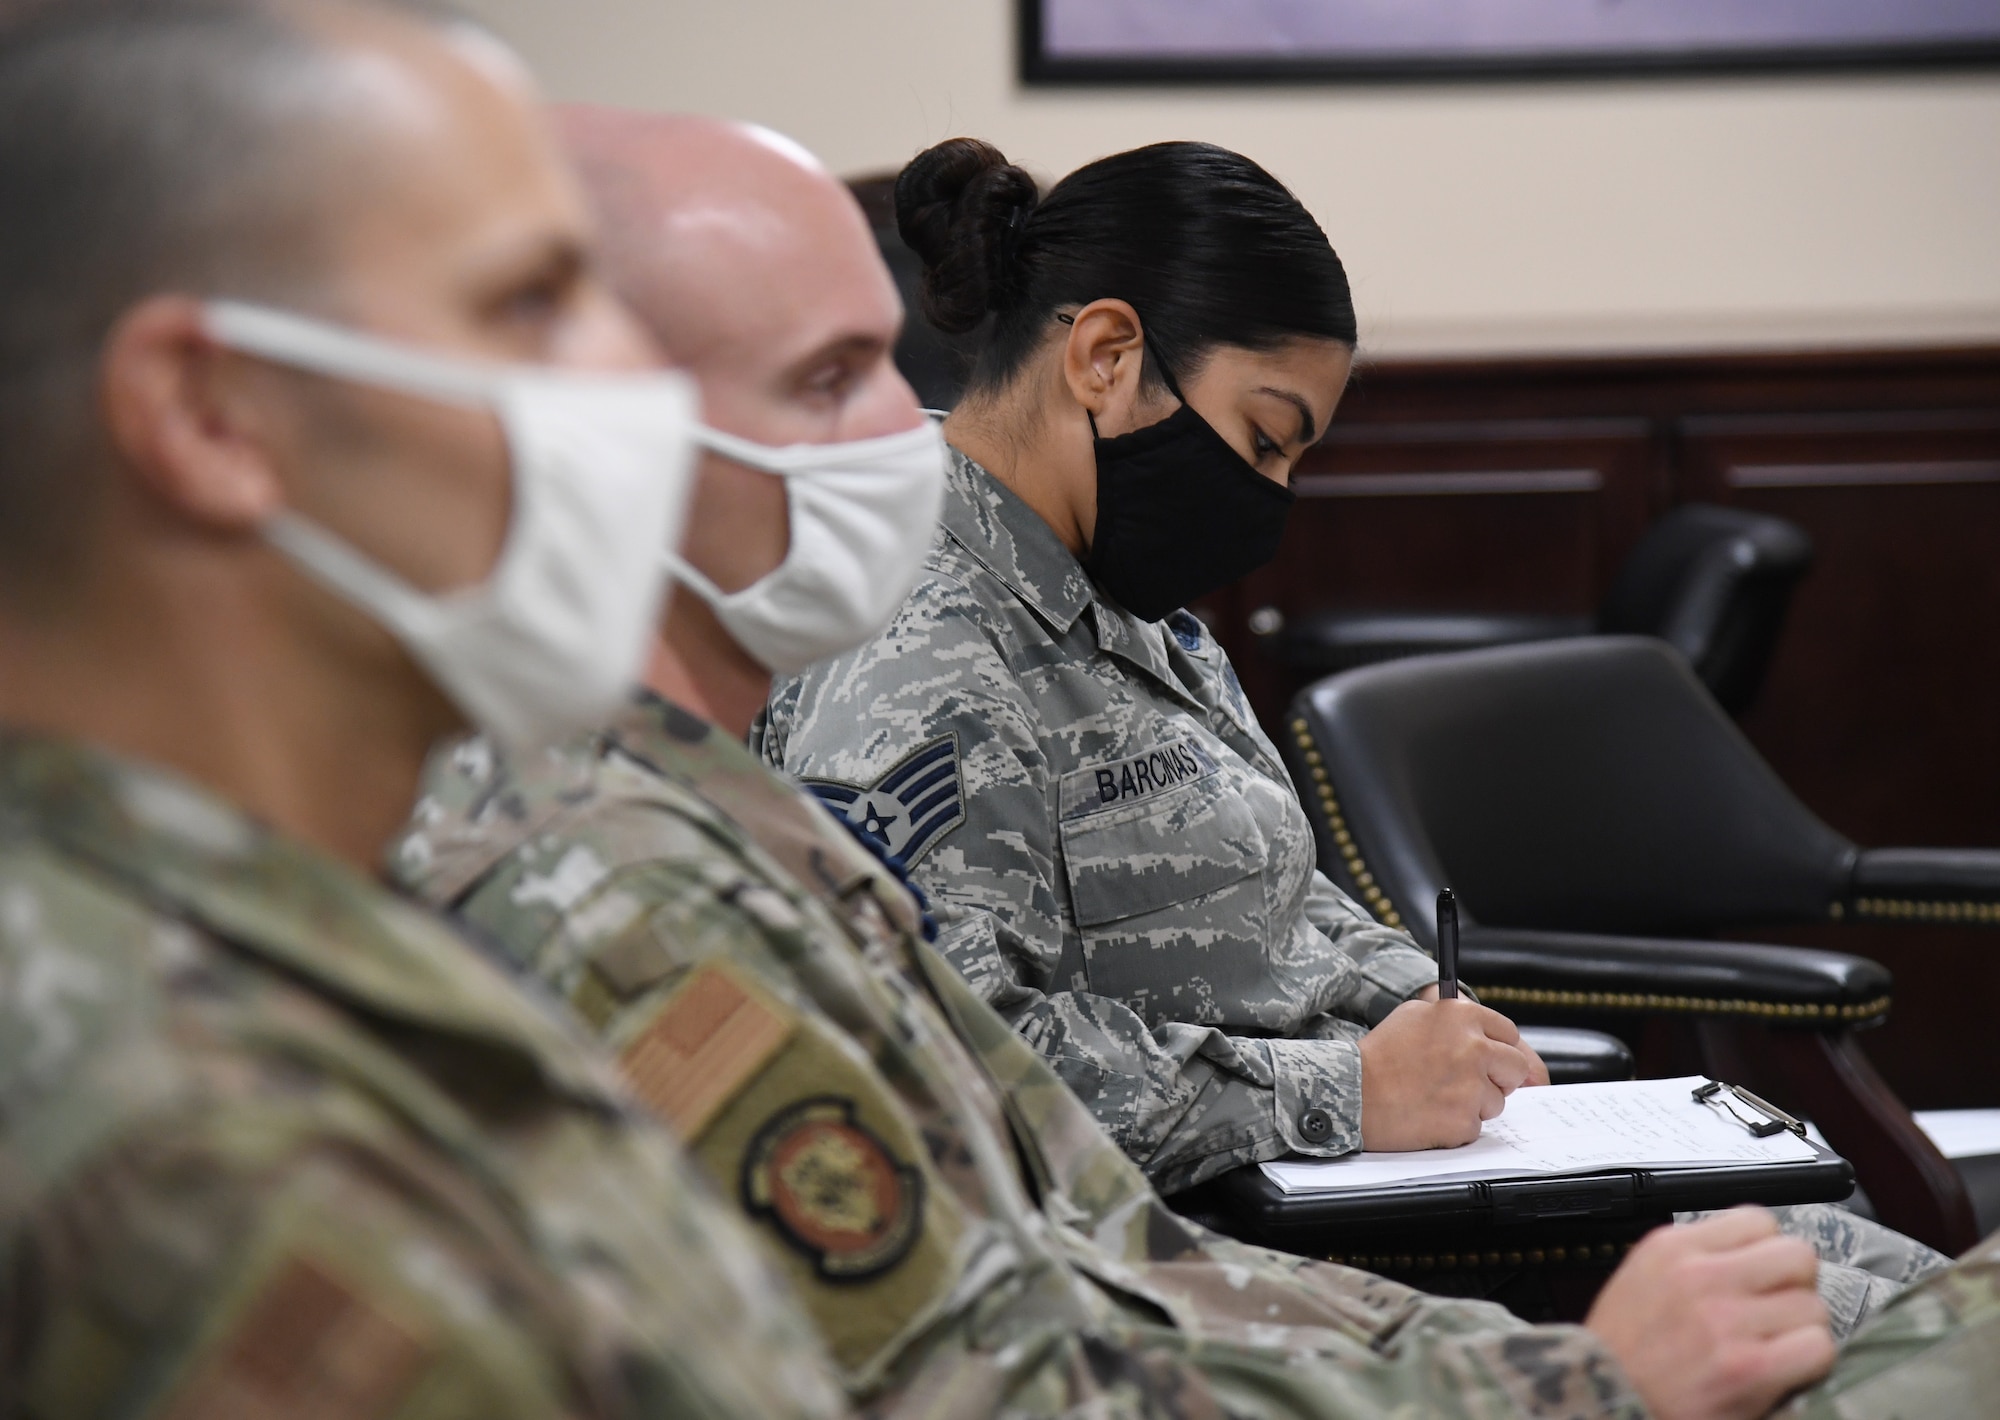 U.S. Air Force staff Sgt. Erinelle Barcinas, 338th Training Squadron military training leader, takes notes during the Continuous Process Improvement workshop inside Matero Hall at Keesler Air Force Base, Mississippi, October 1, 2020. The workshop included 81st Training Group military training instructors discussing ways of improvement for current procedures being followed by focusing on maximizing value, minimizing waste, sharing best practices and standardizing across the 81st TRG whenever and where ever possible. (U.S. Air Force photo by Kemberly Groue)